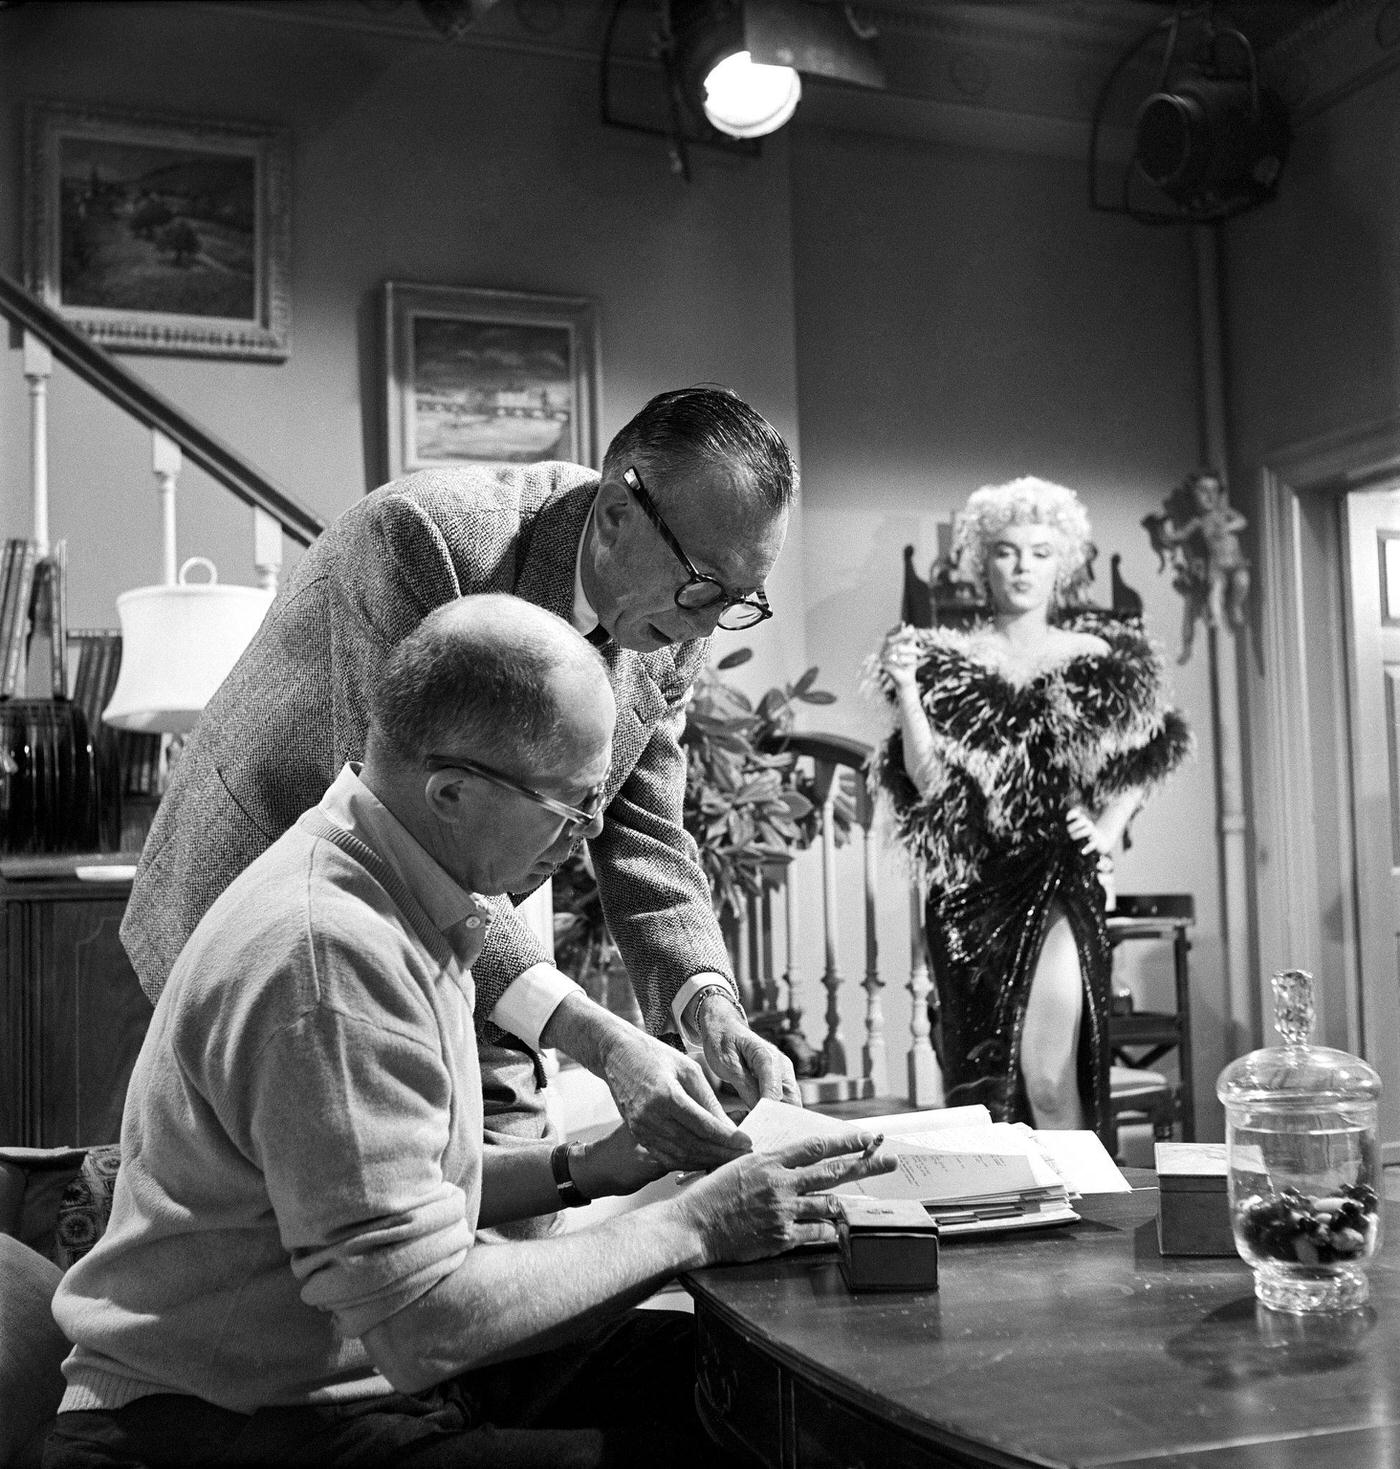 Marilyn Monroe wearing a feather boa while working on a scene with director Billy Wilder, seated at a table, 1954